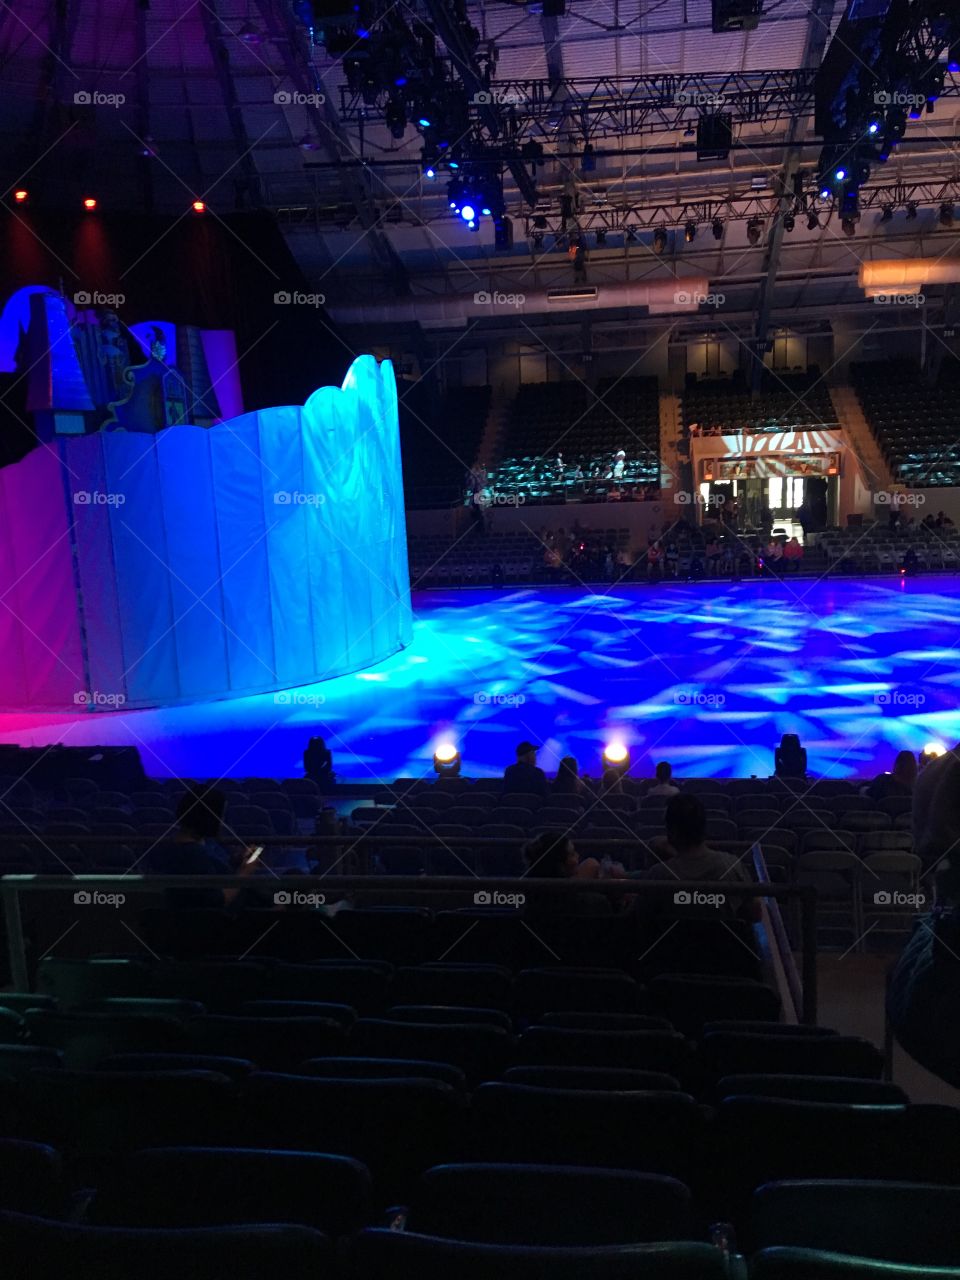 Disney on ice. Had a great time thanks to our senior center here in town and our friends here.